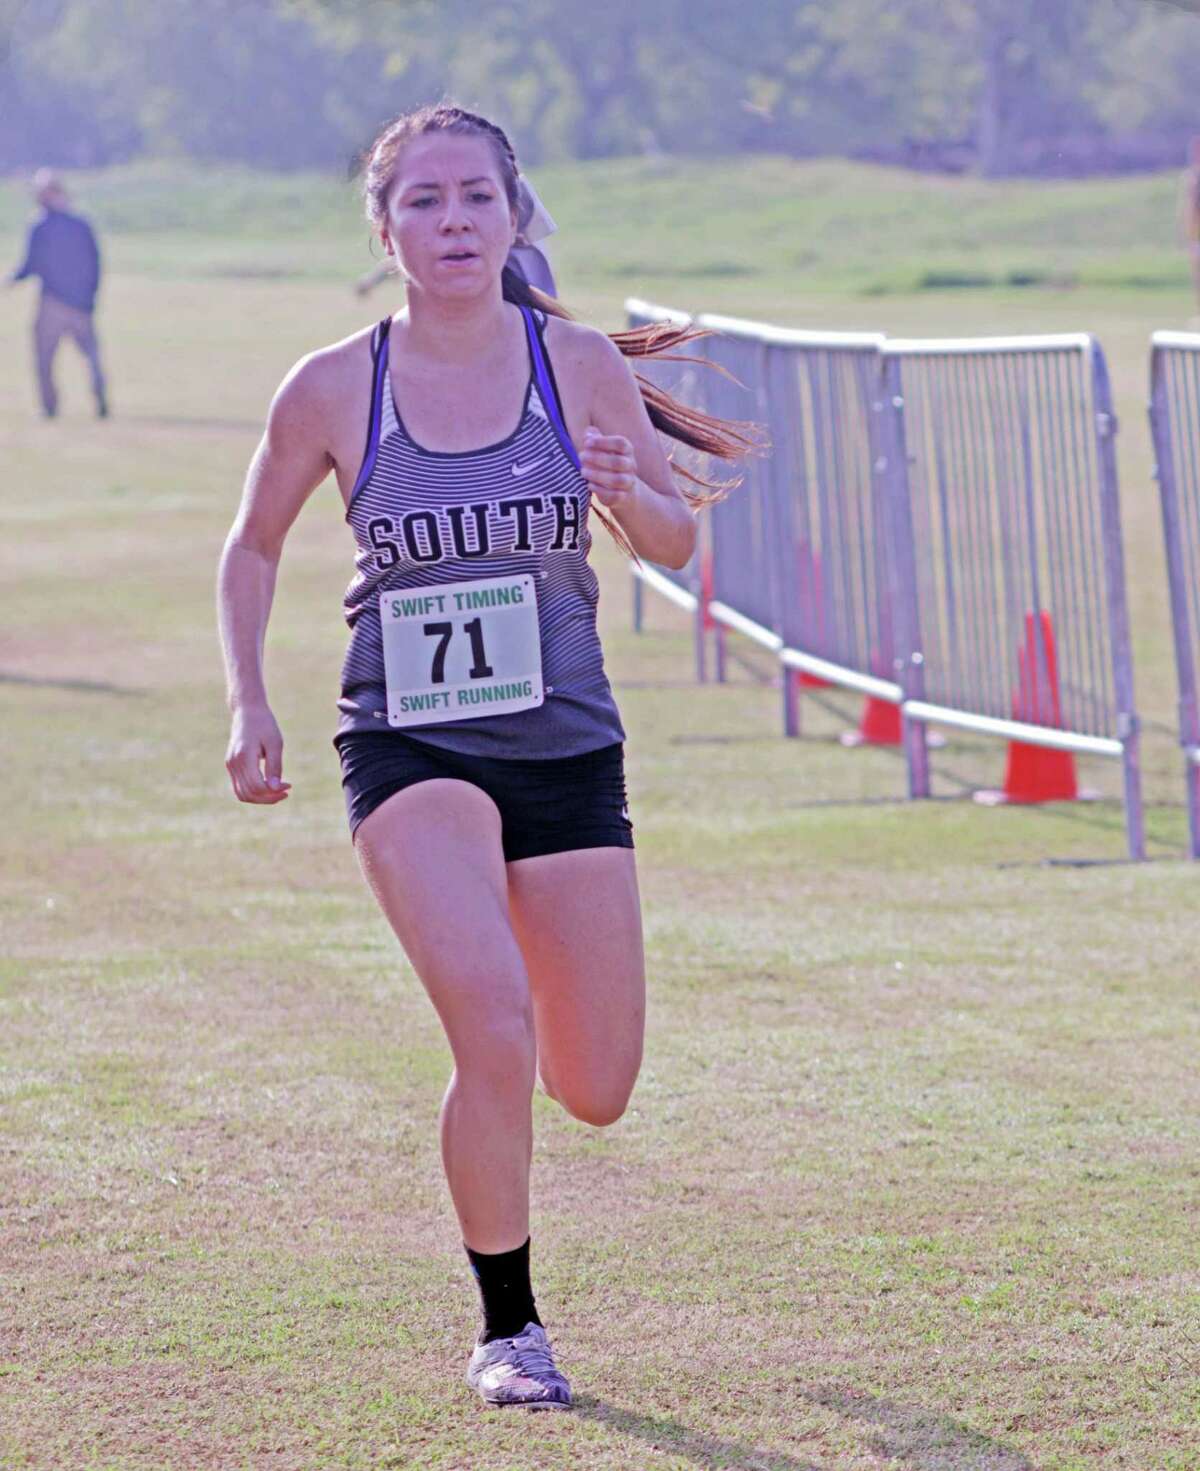 United South’s Berenice Almendariz is slated to run in the regional meet on Monday in Corpus Christi. Last season she qualified to state.